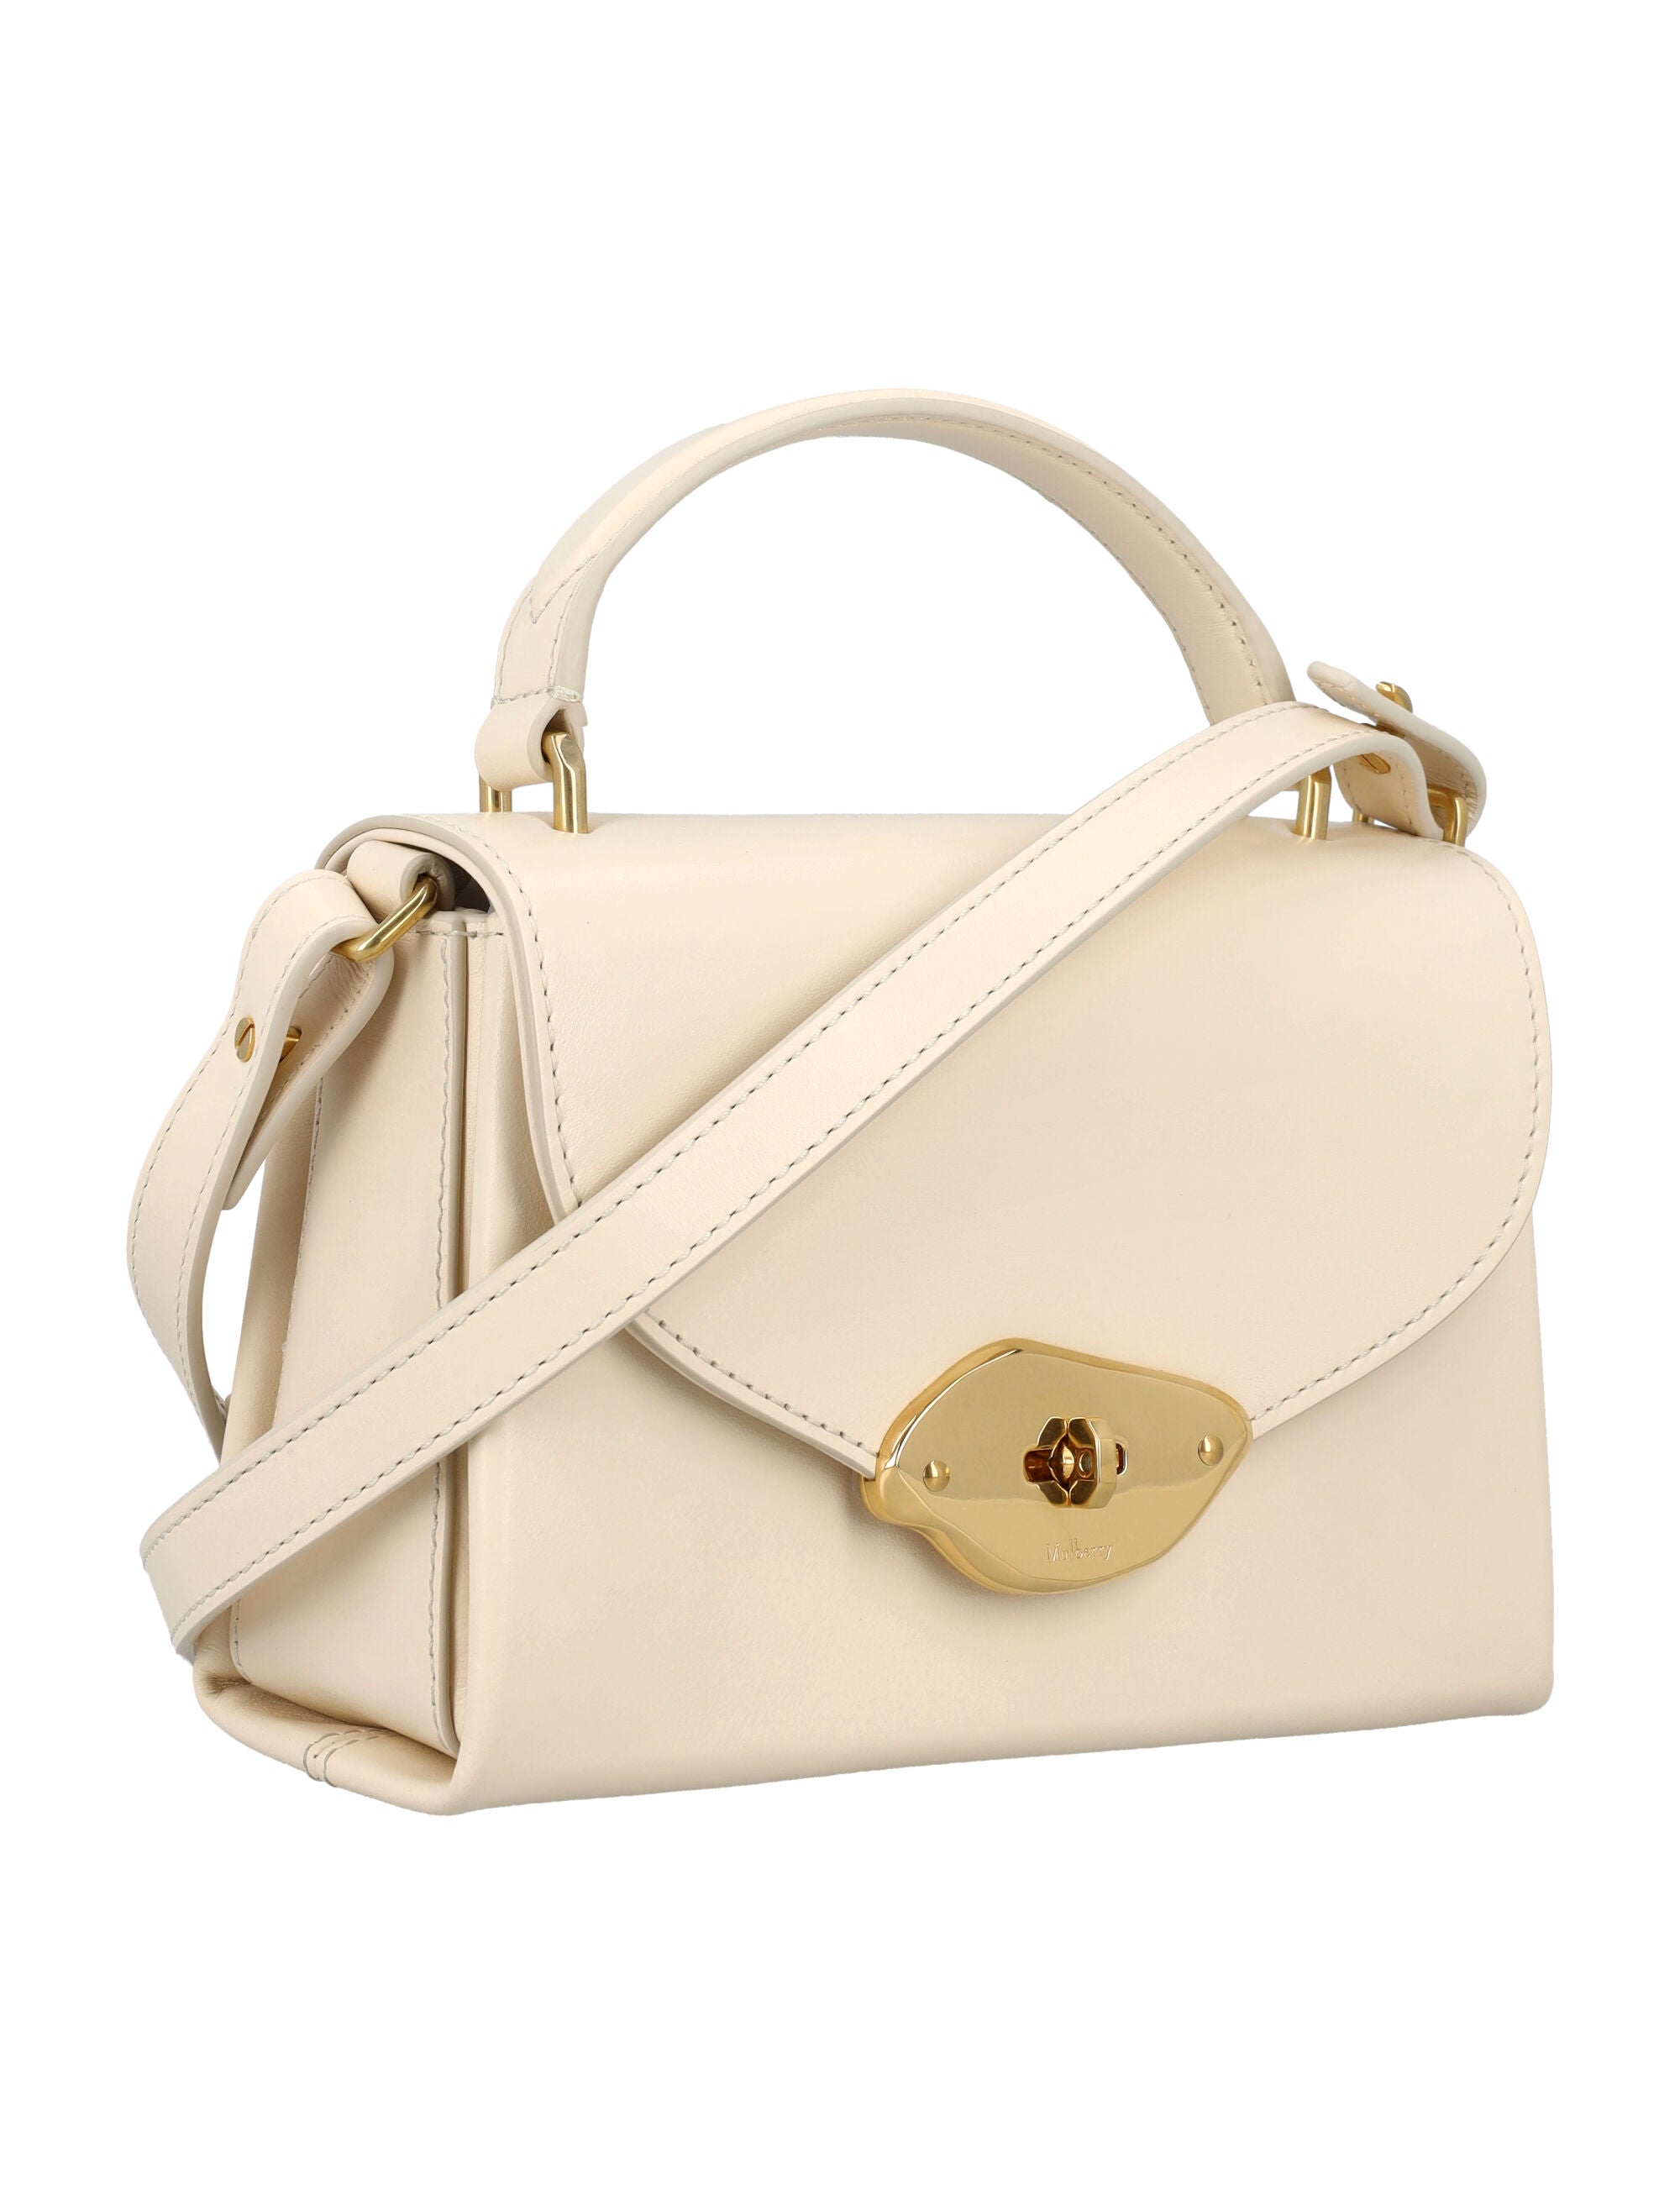 Shop Mulberry Modern Glossy Wool Top Handle Handbag For Women In White